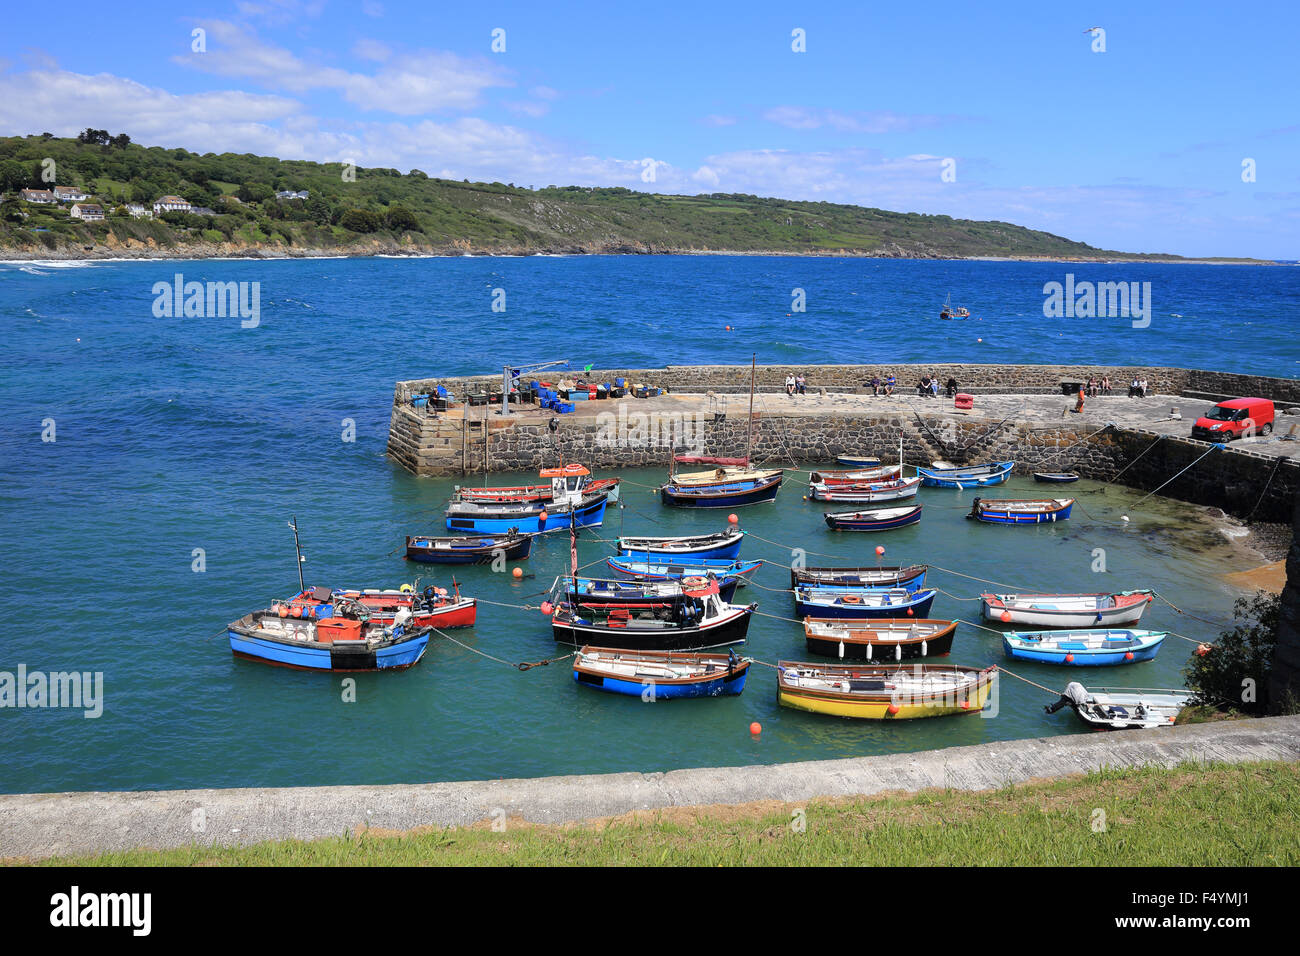 The harbour at Coverack on a calm summer's day, Cornwall, England, UK. Stock Photo